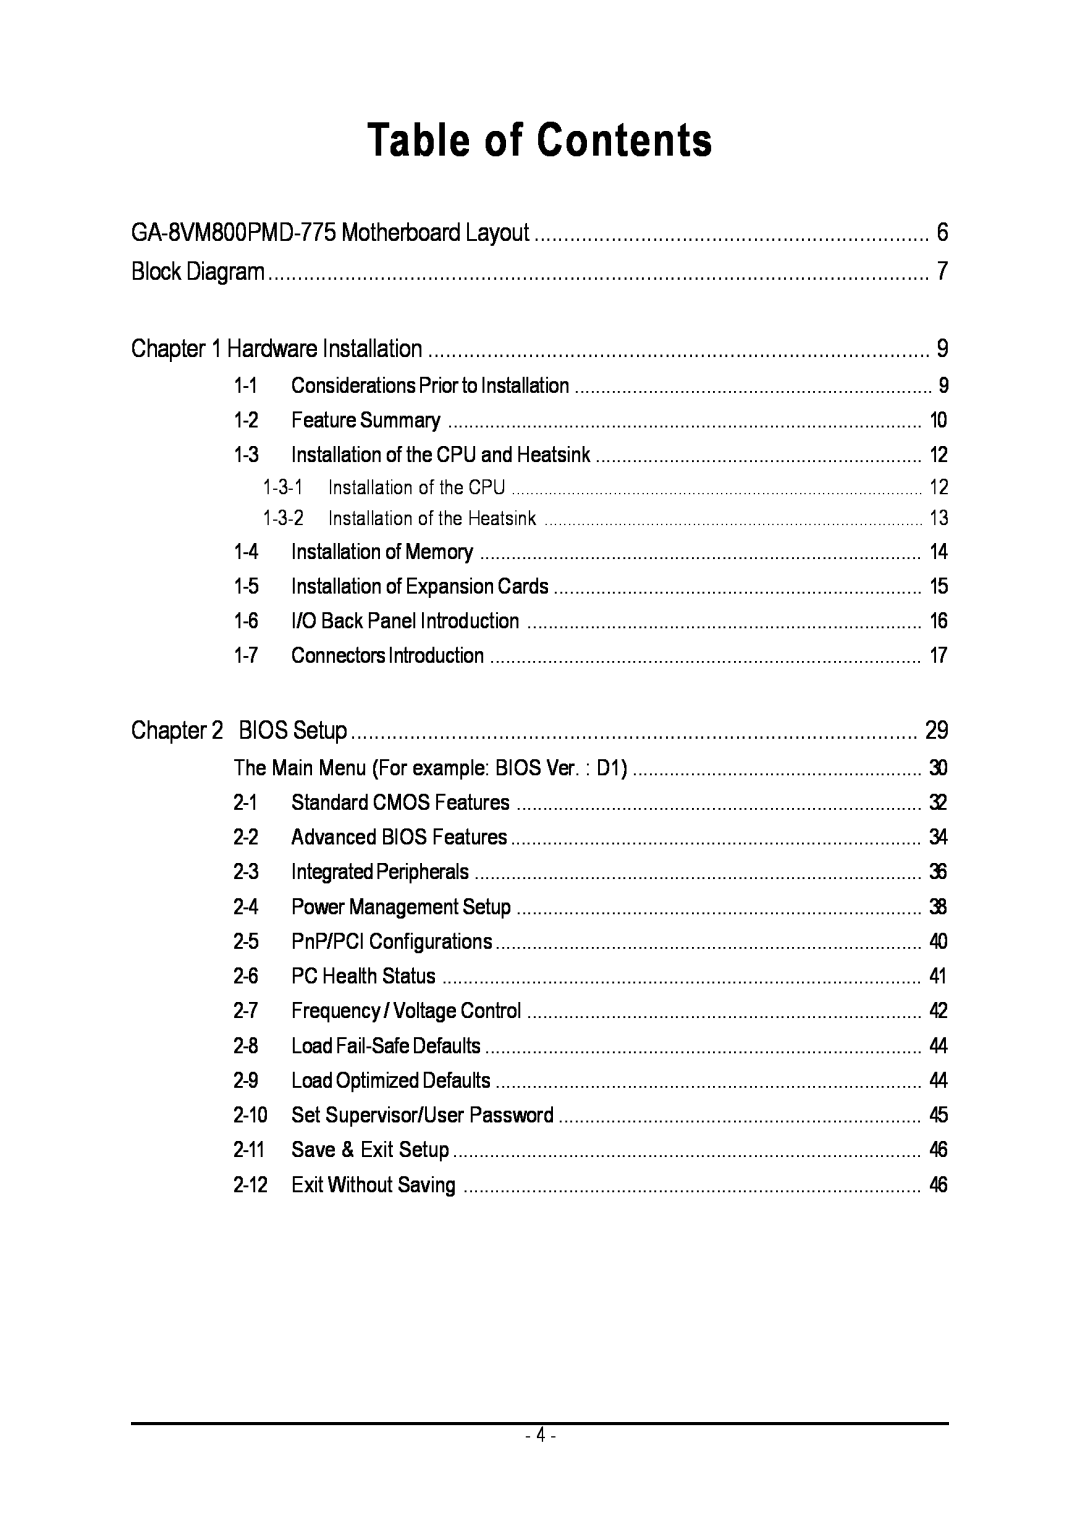 Intel GA-8VM800PMD-775 user manual Table of Contents 